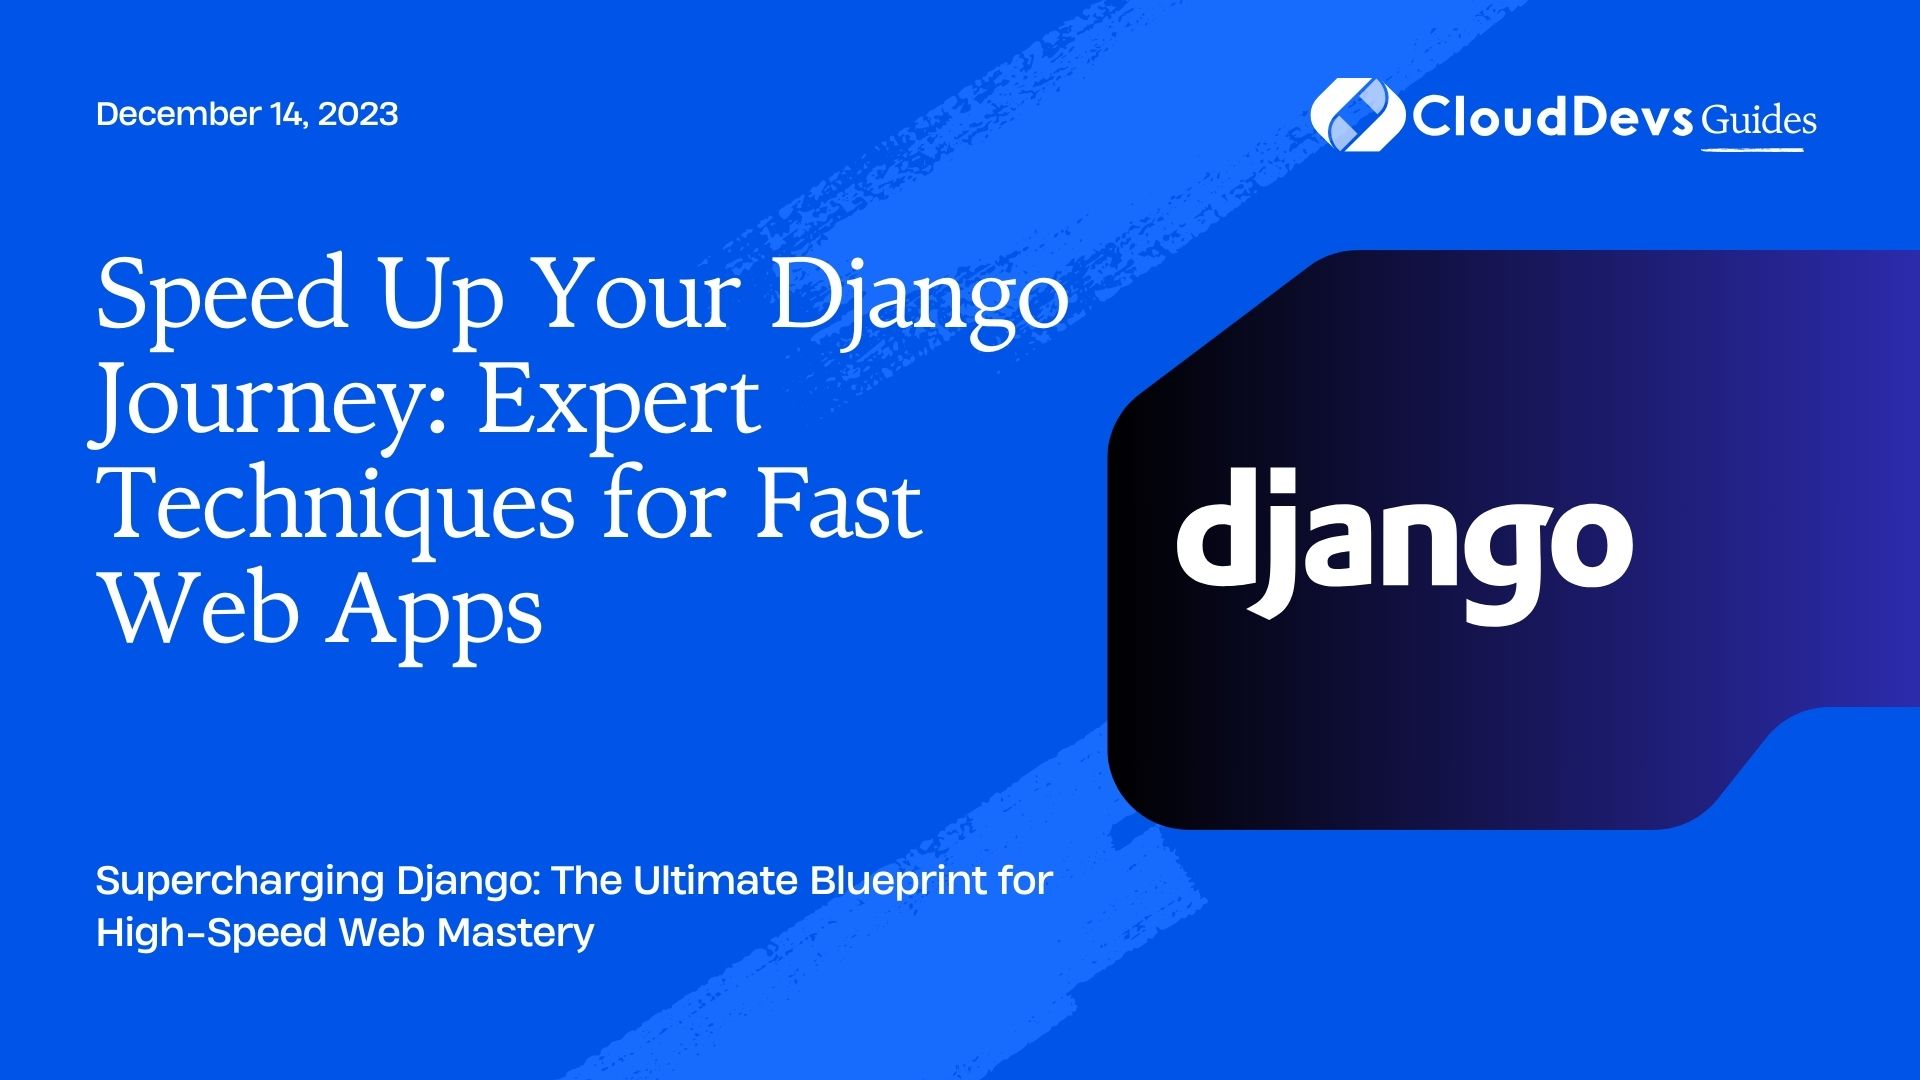 Speed Up Your Django Journey: Expert Techniques for Fast Web Apps